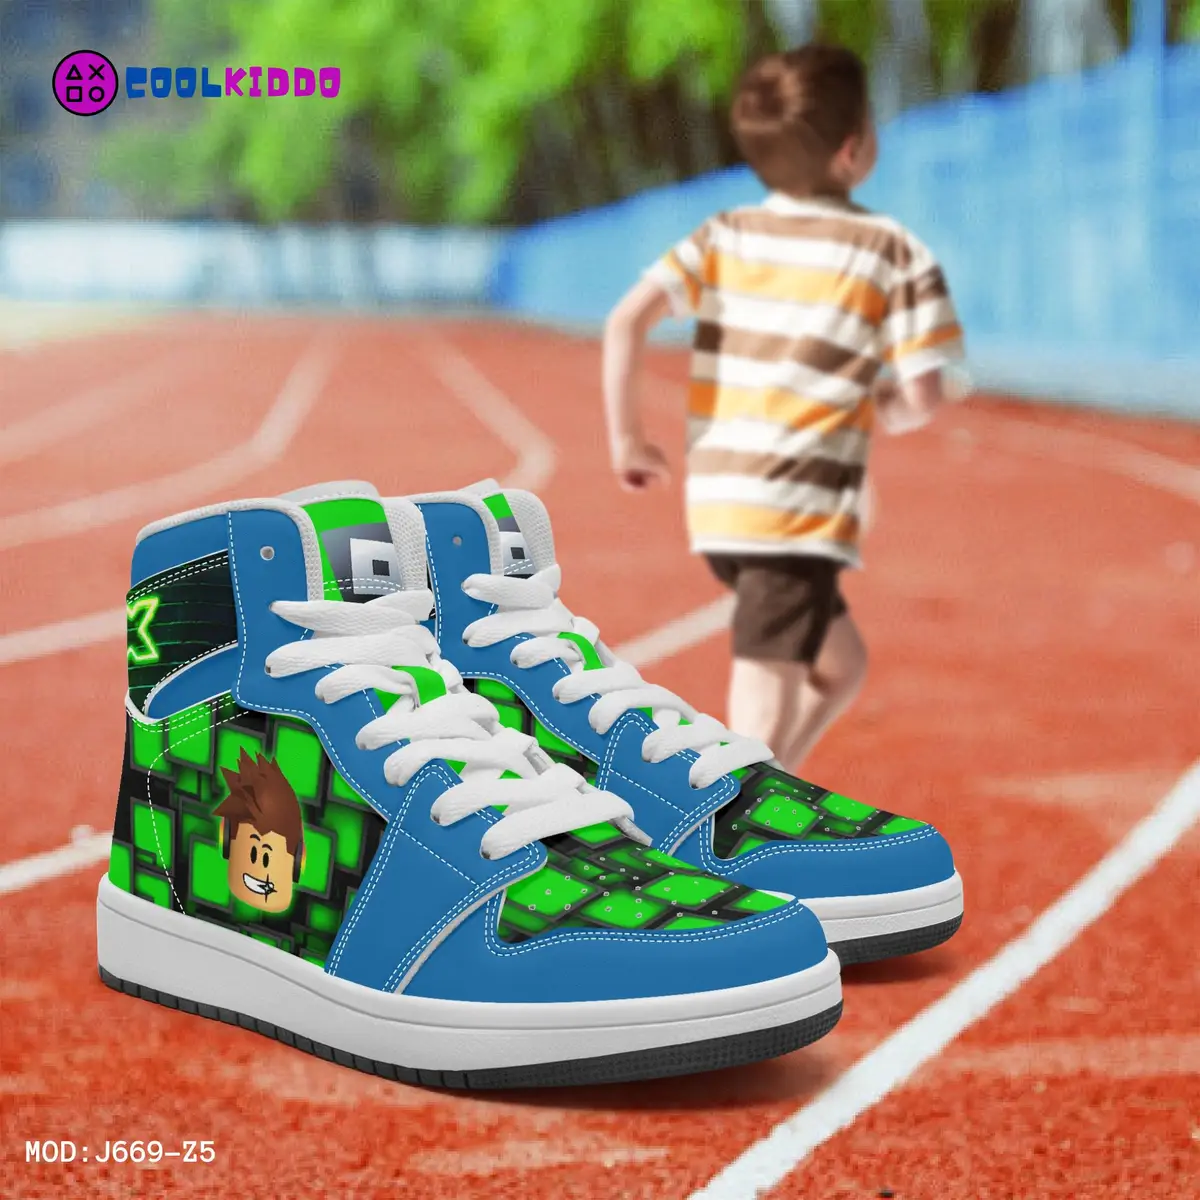 Kids ROBLOX Characters High-Top Shoes Leather Green and Blue, Jordans Style Sneakers Cool Kiddo 22